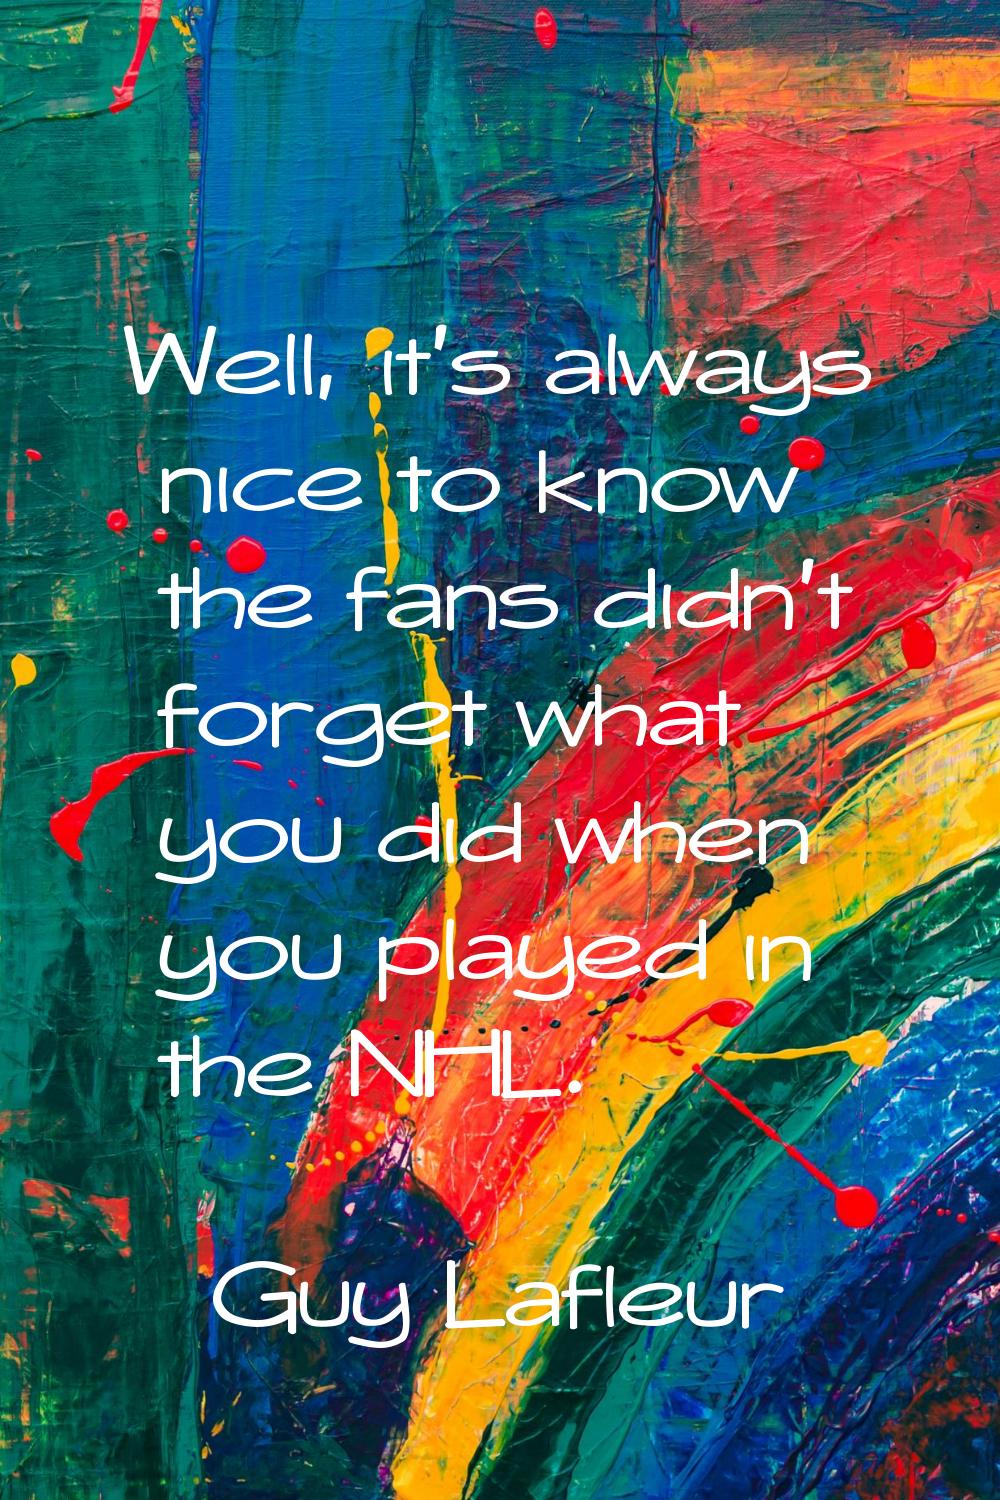 Well, it's always nice to know the fans didn't forget what you did when you played in the NHL.